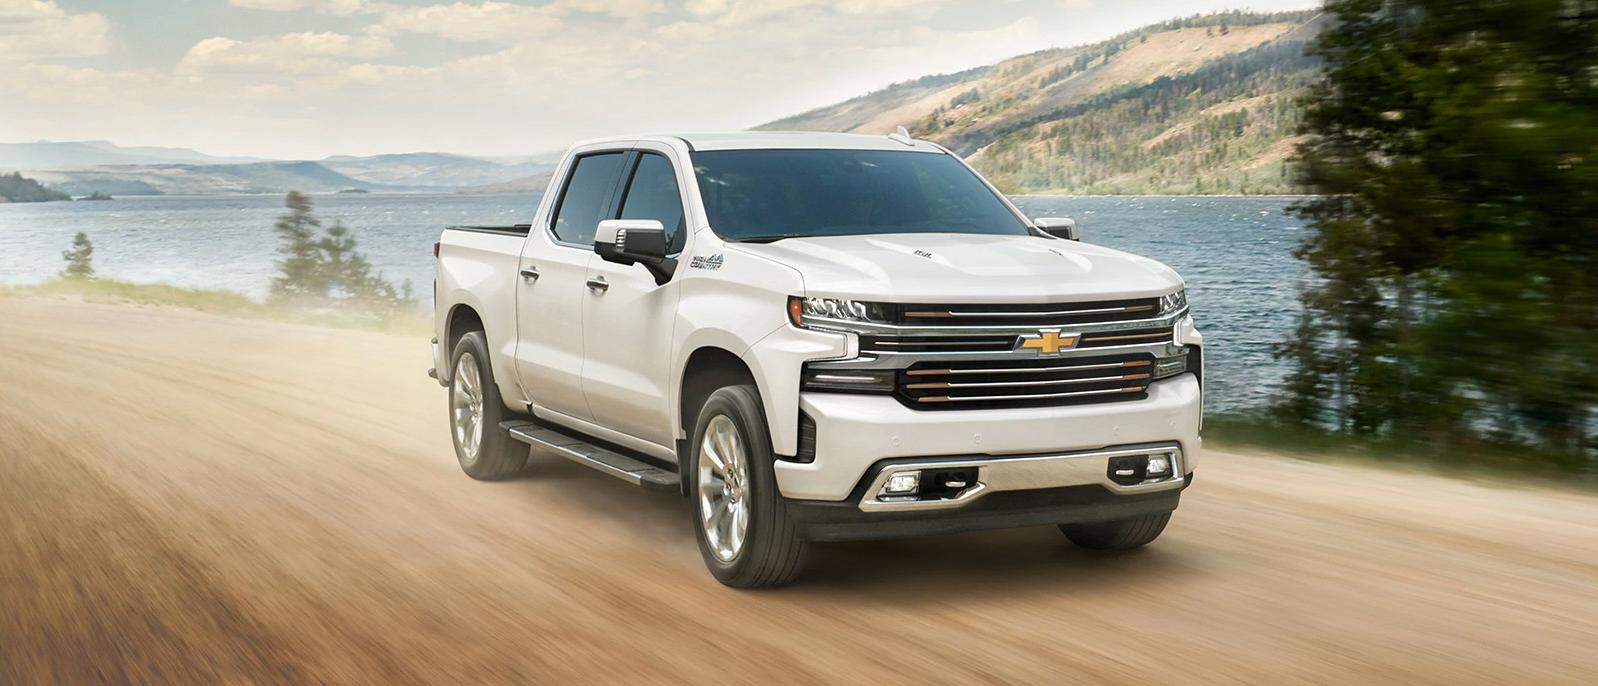 New 2023 Chevrolet Silverado 1500 available at our LEBANON store